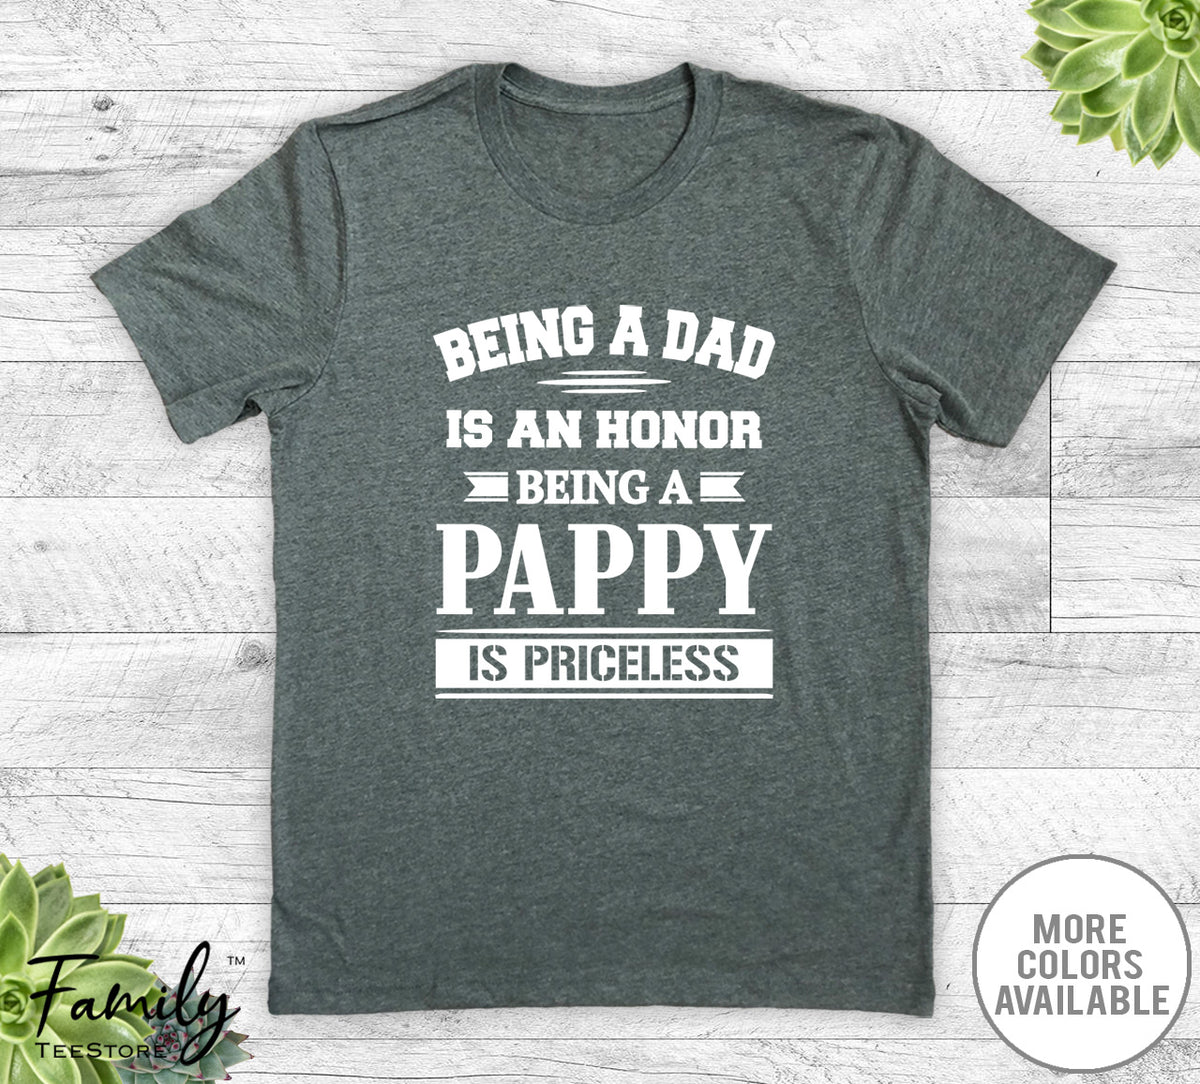 Being A Dad Is An Honor Being A Pappy Is Priceless - Unisex T-shirt - Pappy Shirt - Pappy Gift